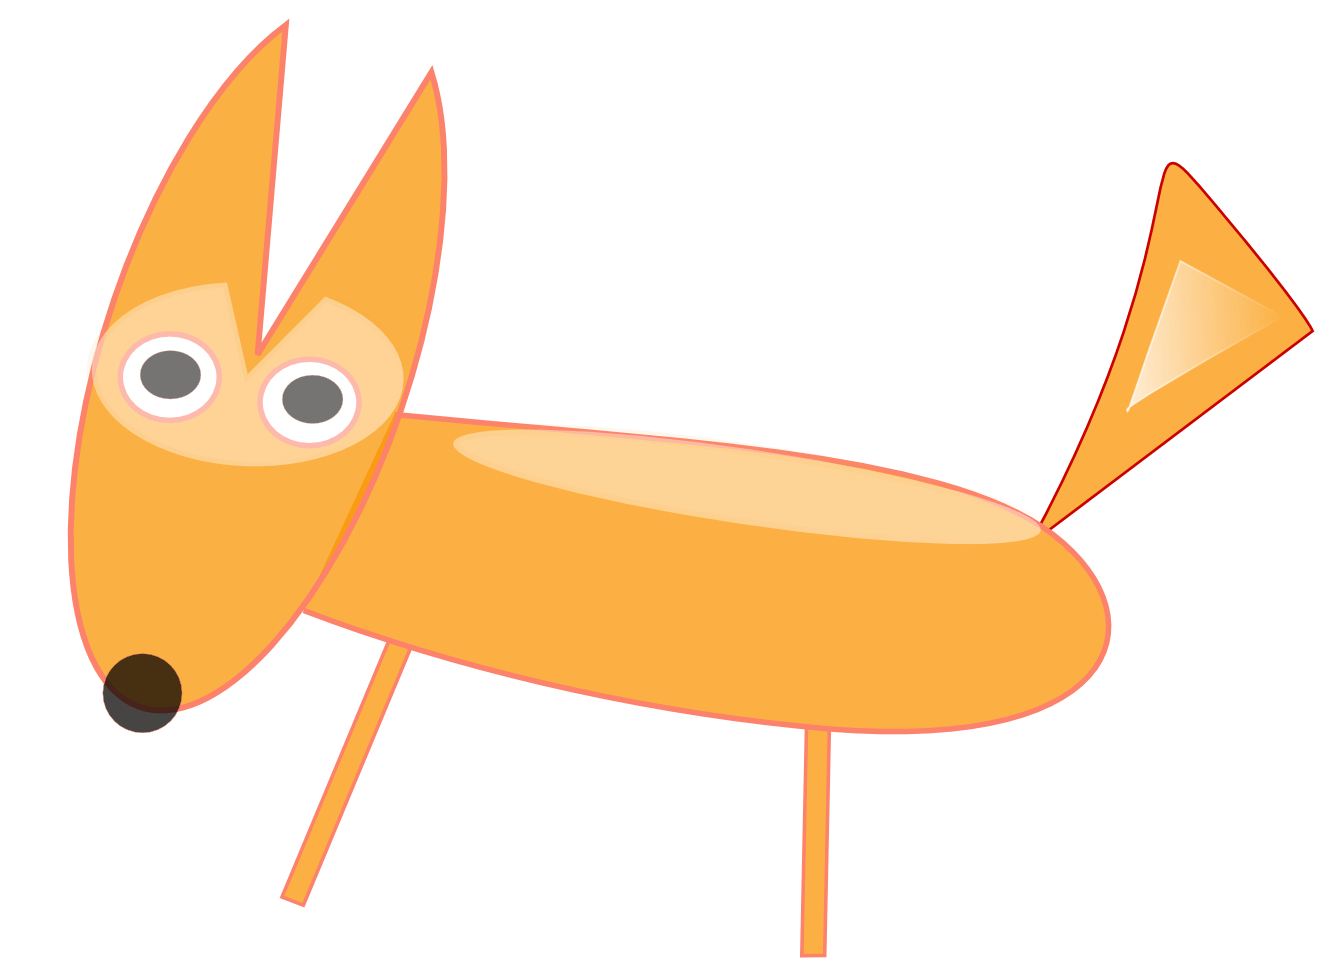 Fox clipart graphic. Head at getdrawings com